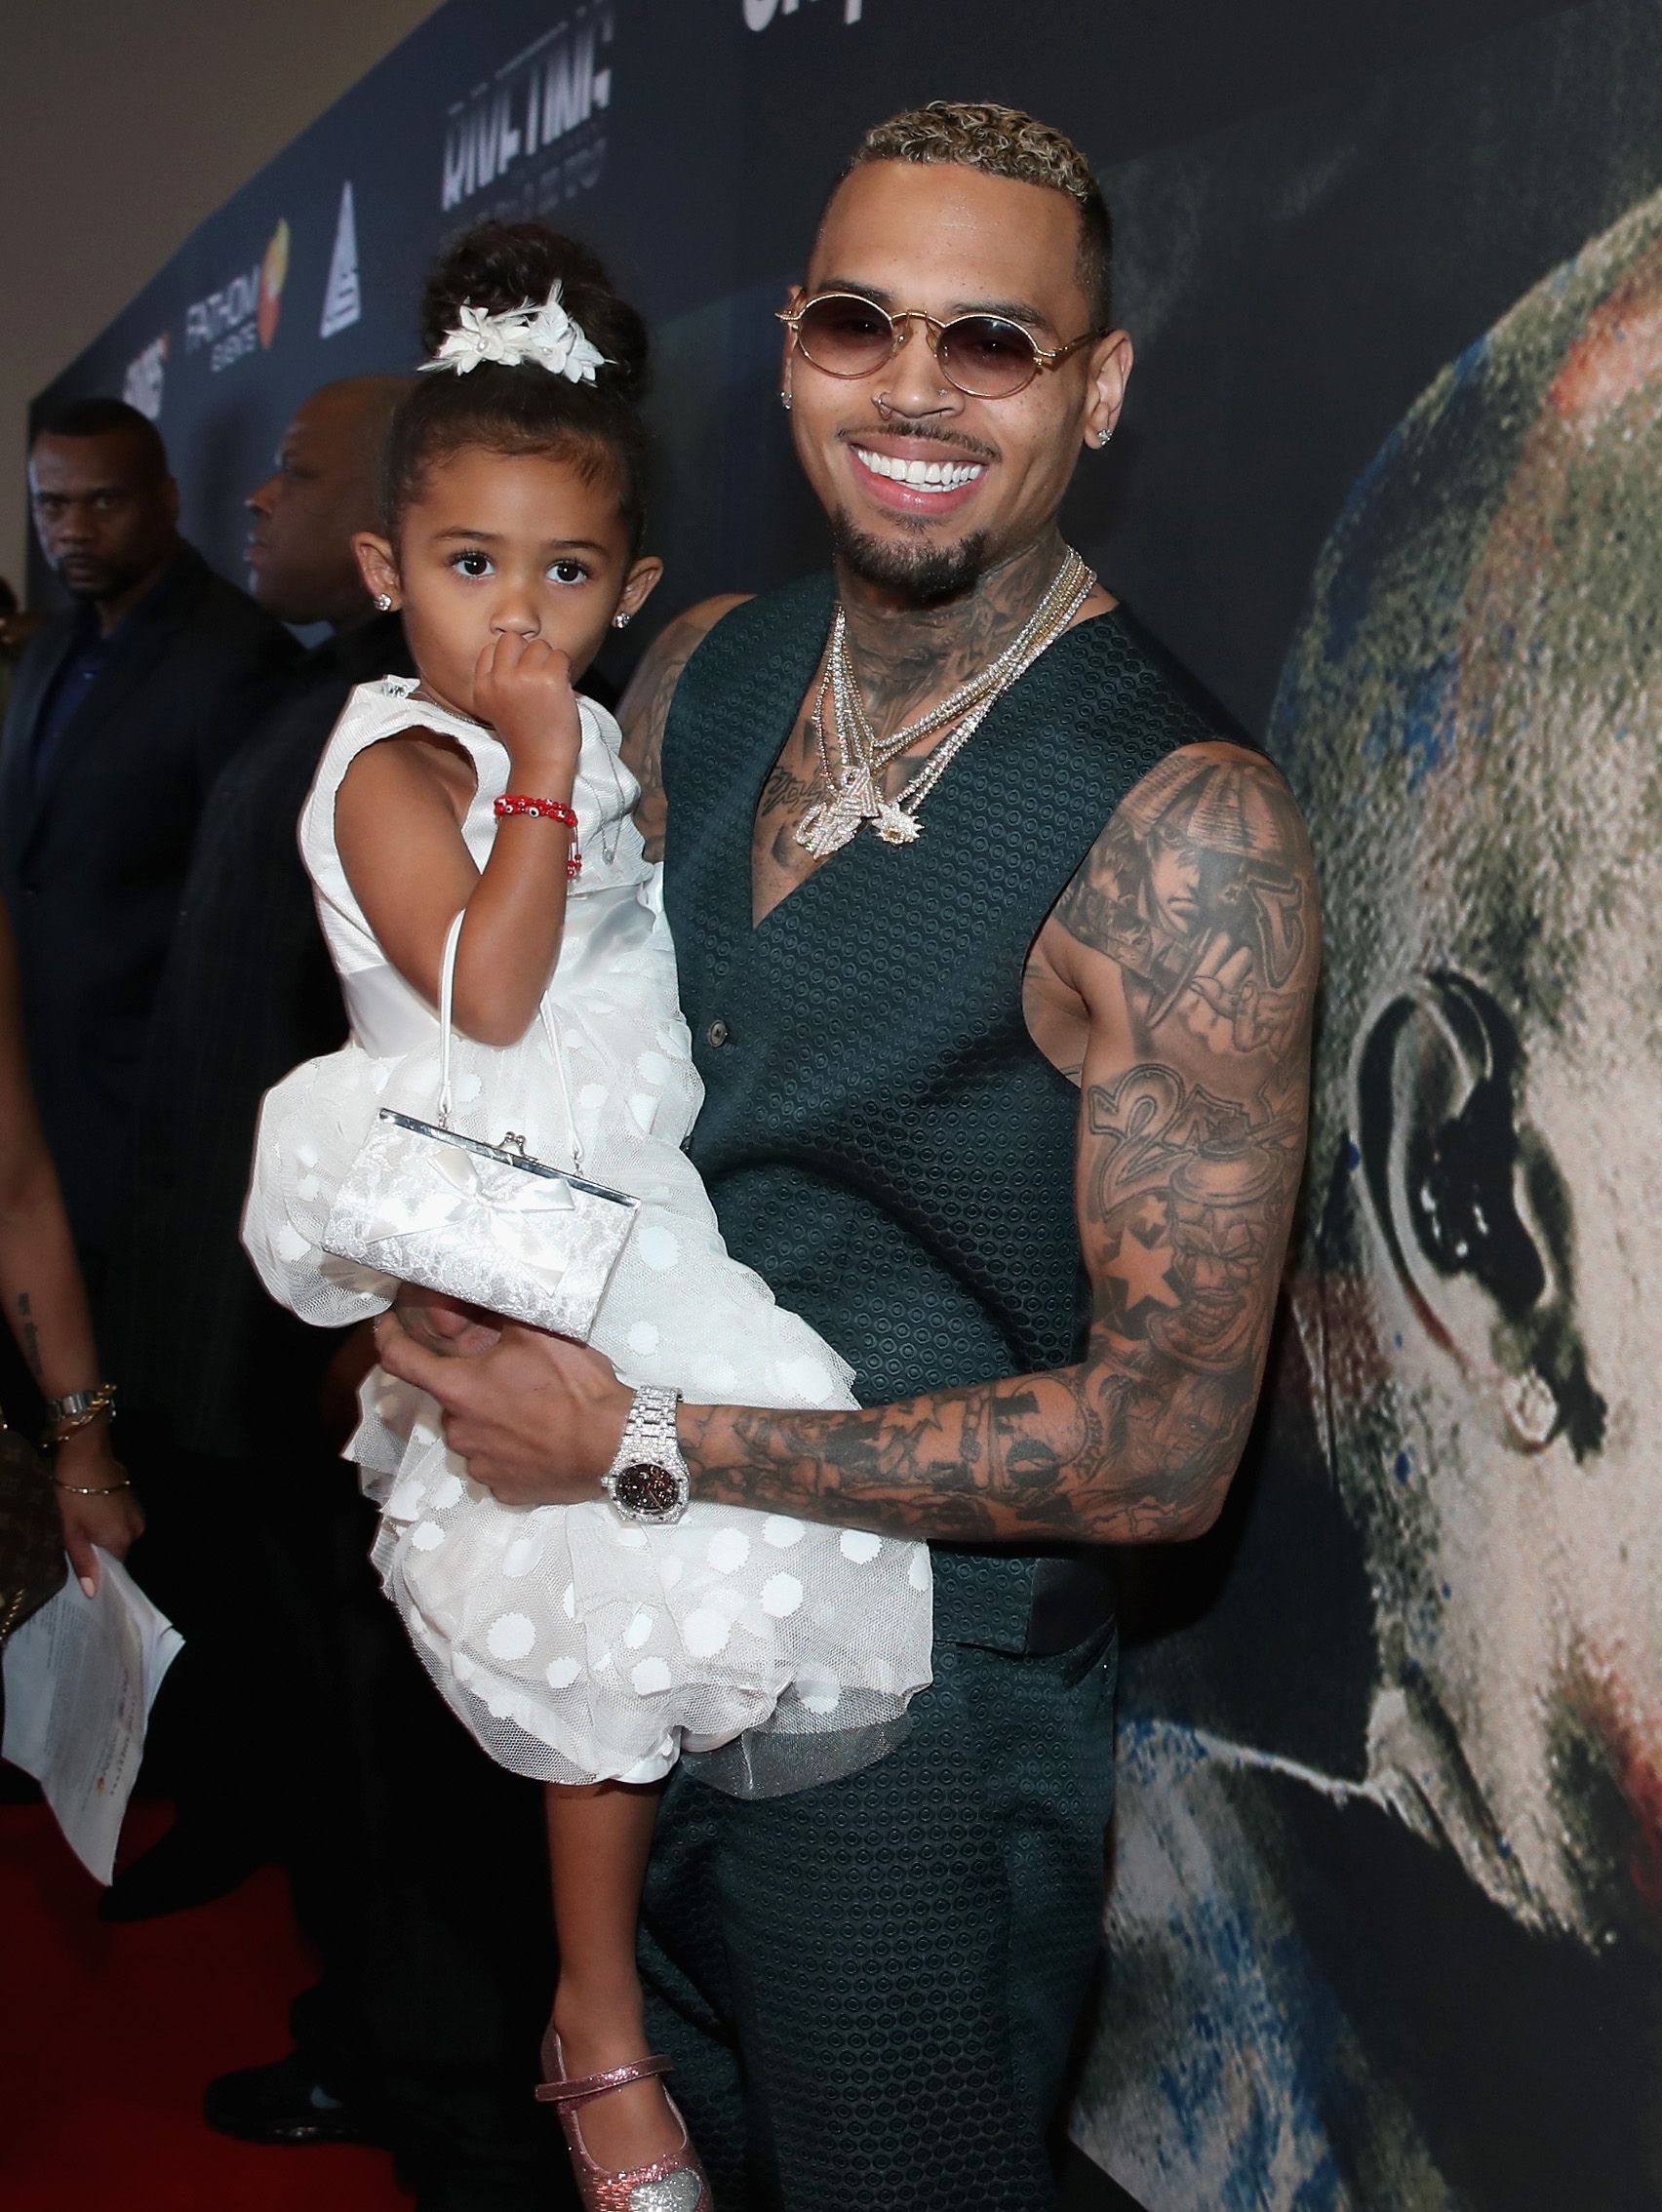 Chris Brown and his daughter Royalty at the premiere of Riveting Entertainment's "Chris Brown: Welcome To My Life" at L.A. LIVE on June 6, 2017 in Los Angeles, California | Photo: Getty Images 